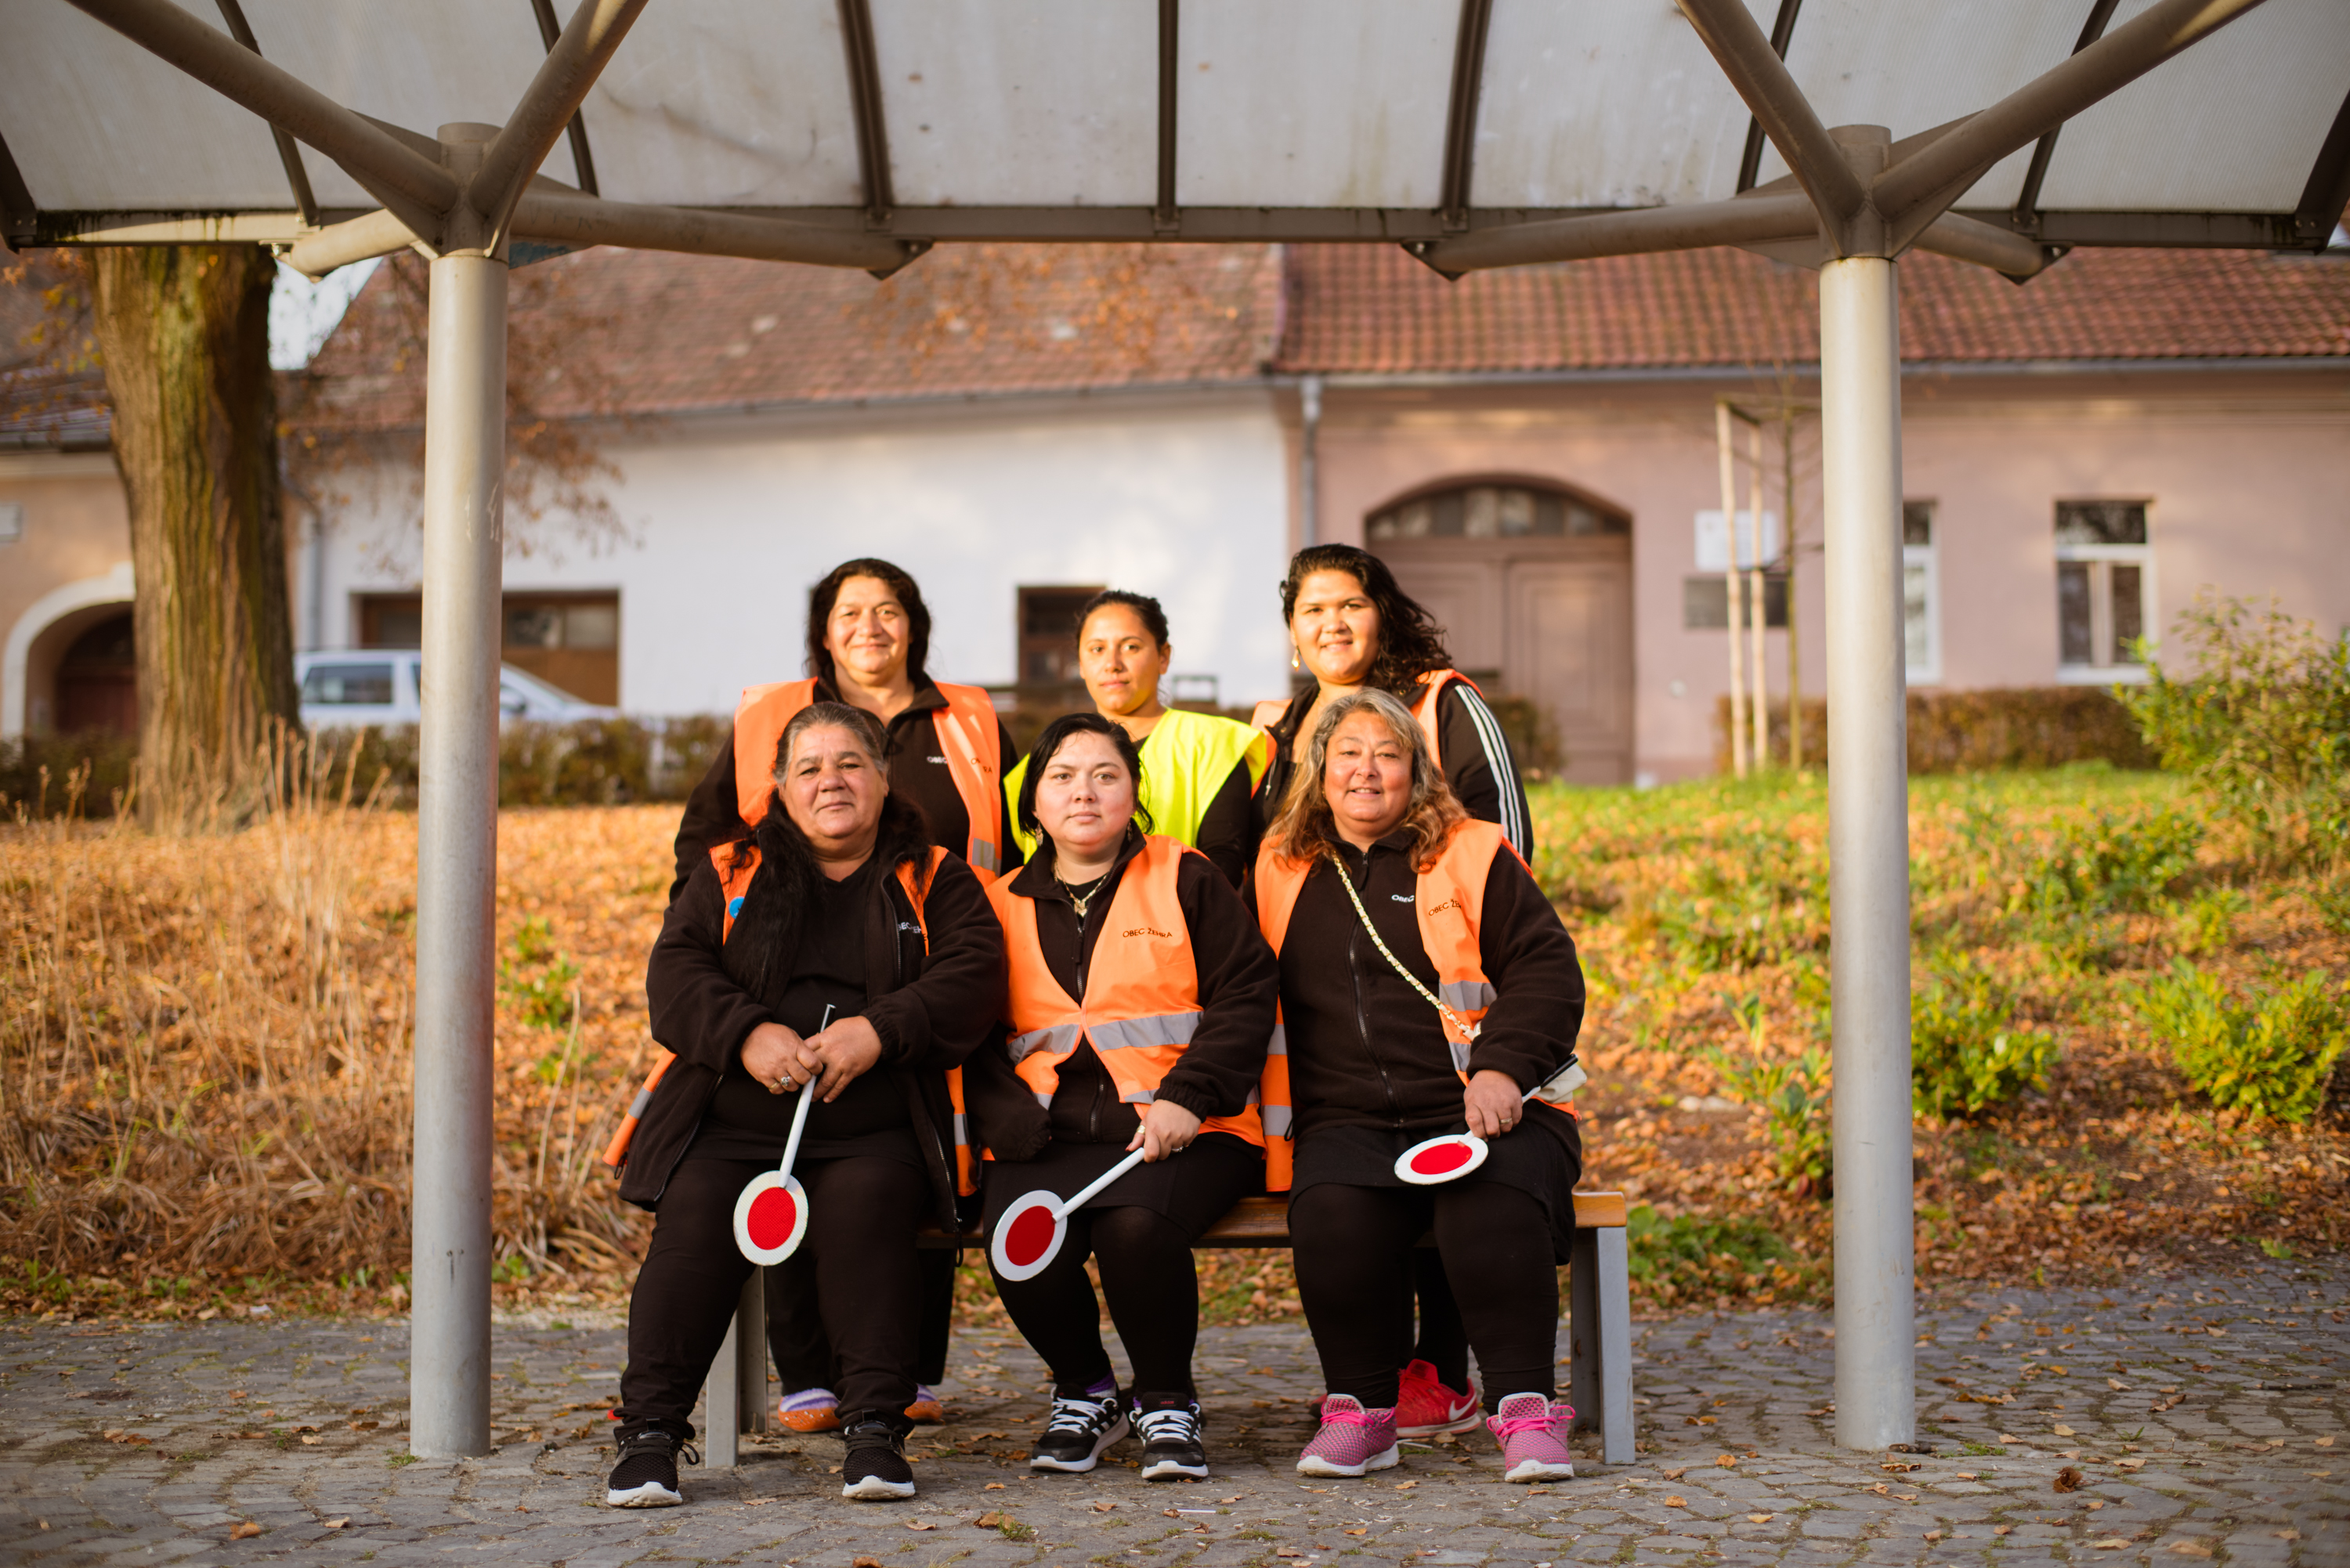 Six women with vests and handheld stop signs sitting at the bus stop. Phot. Erik Švec